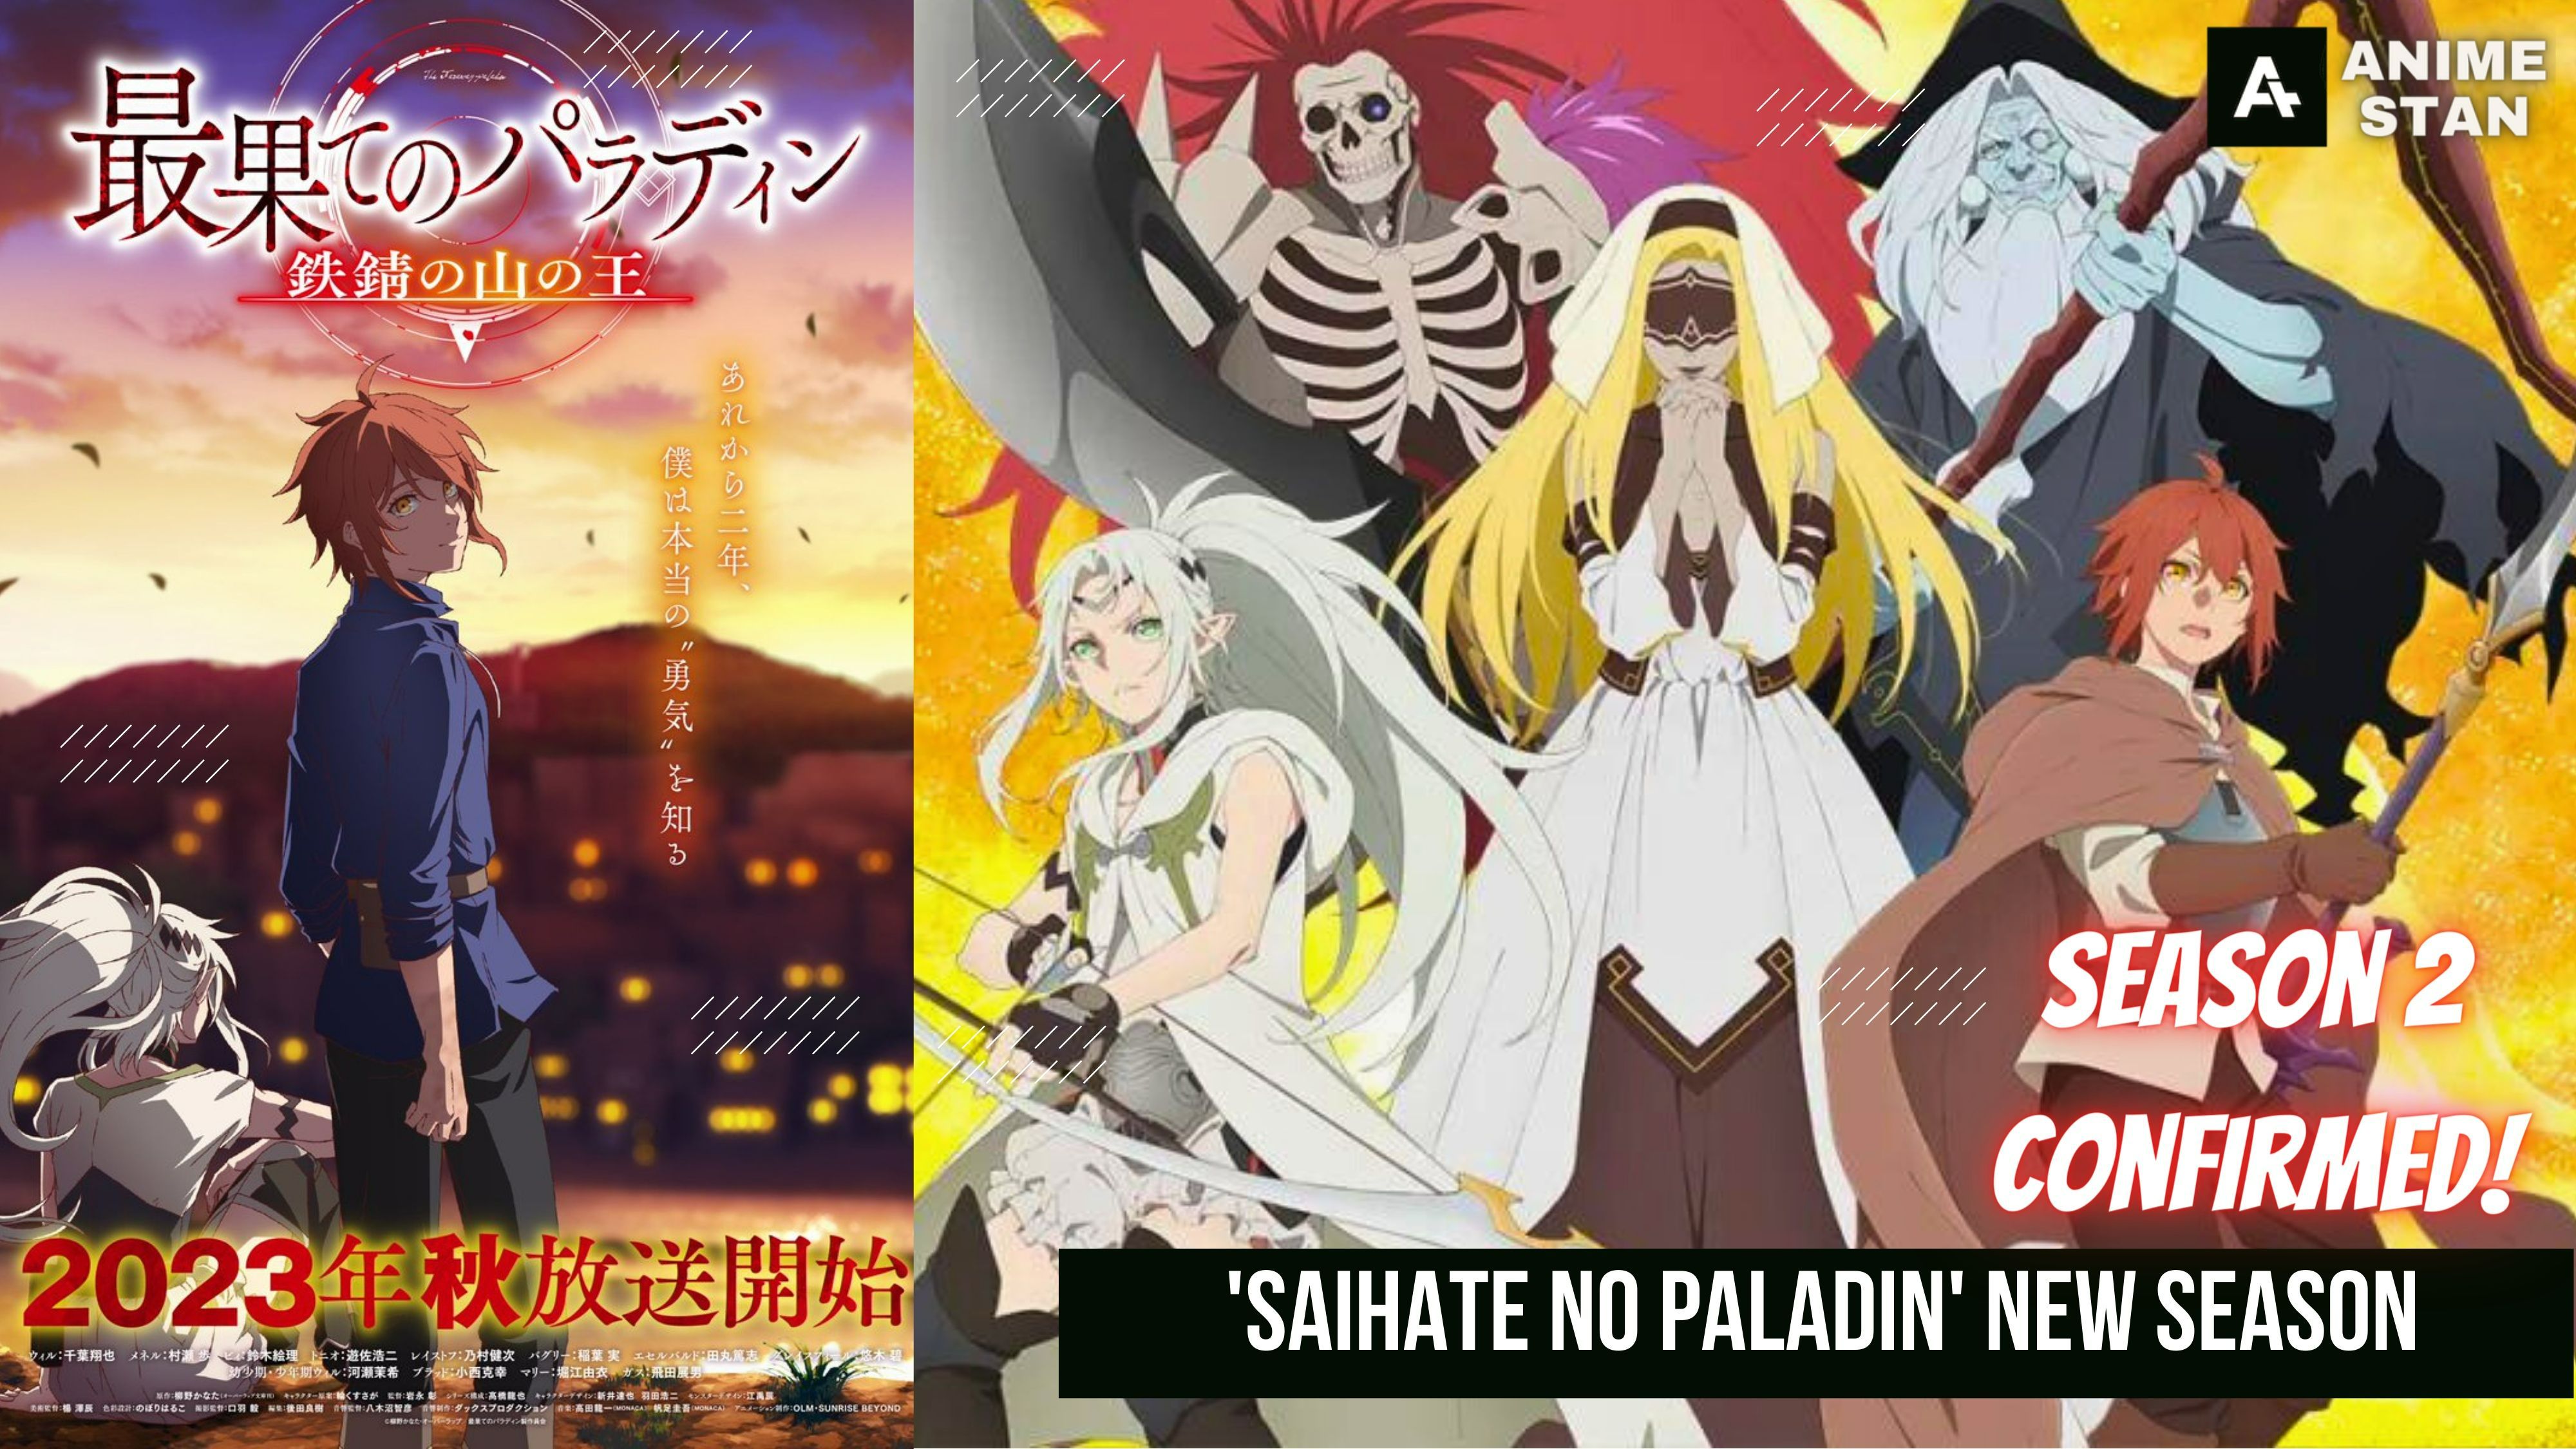 Exciting News for Anime Fans: The Faraway Paladin Season 2